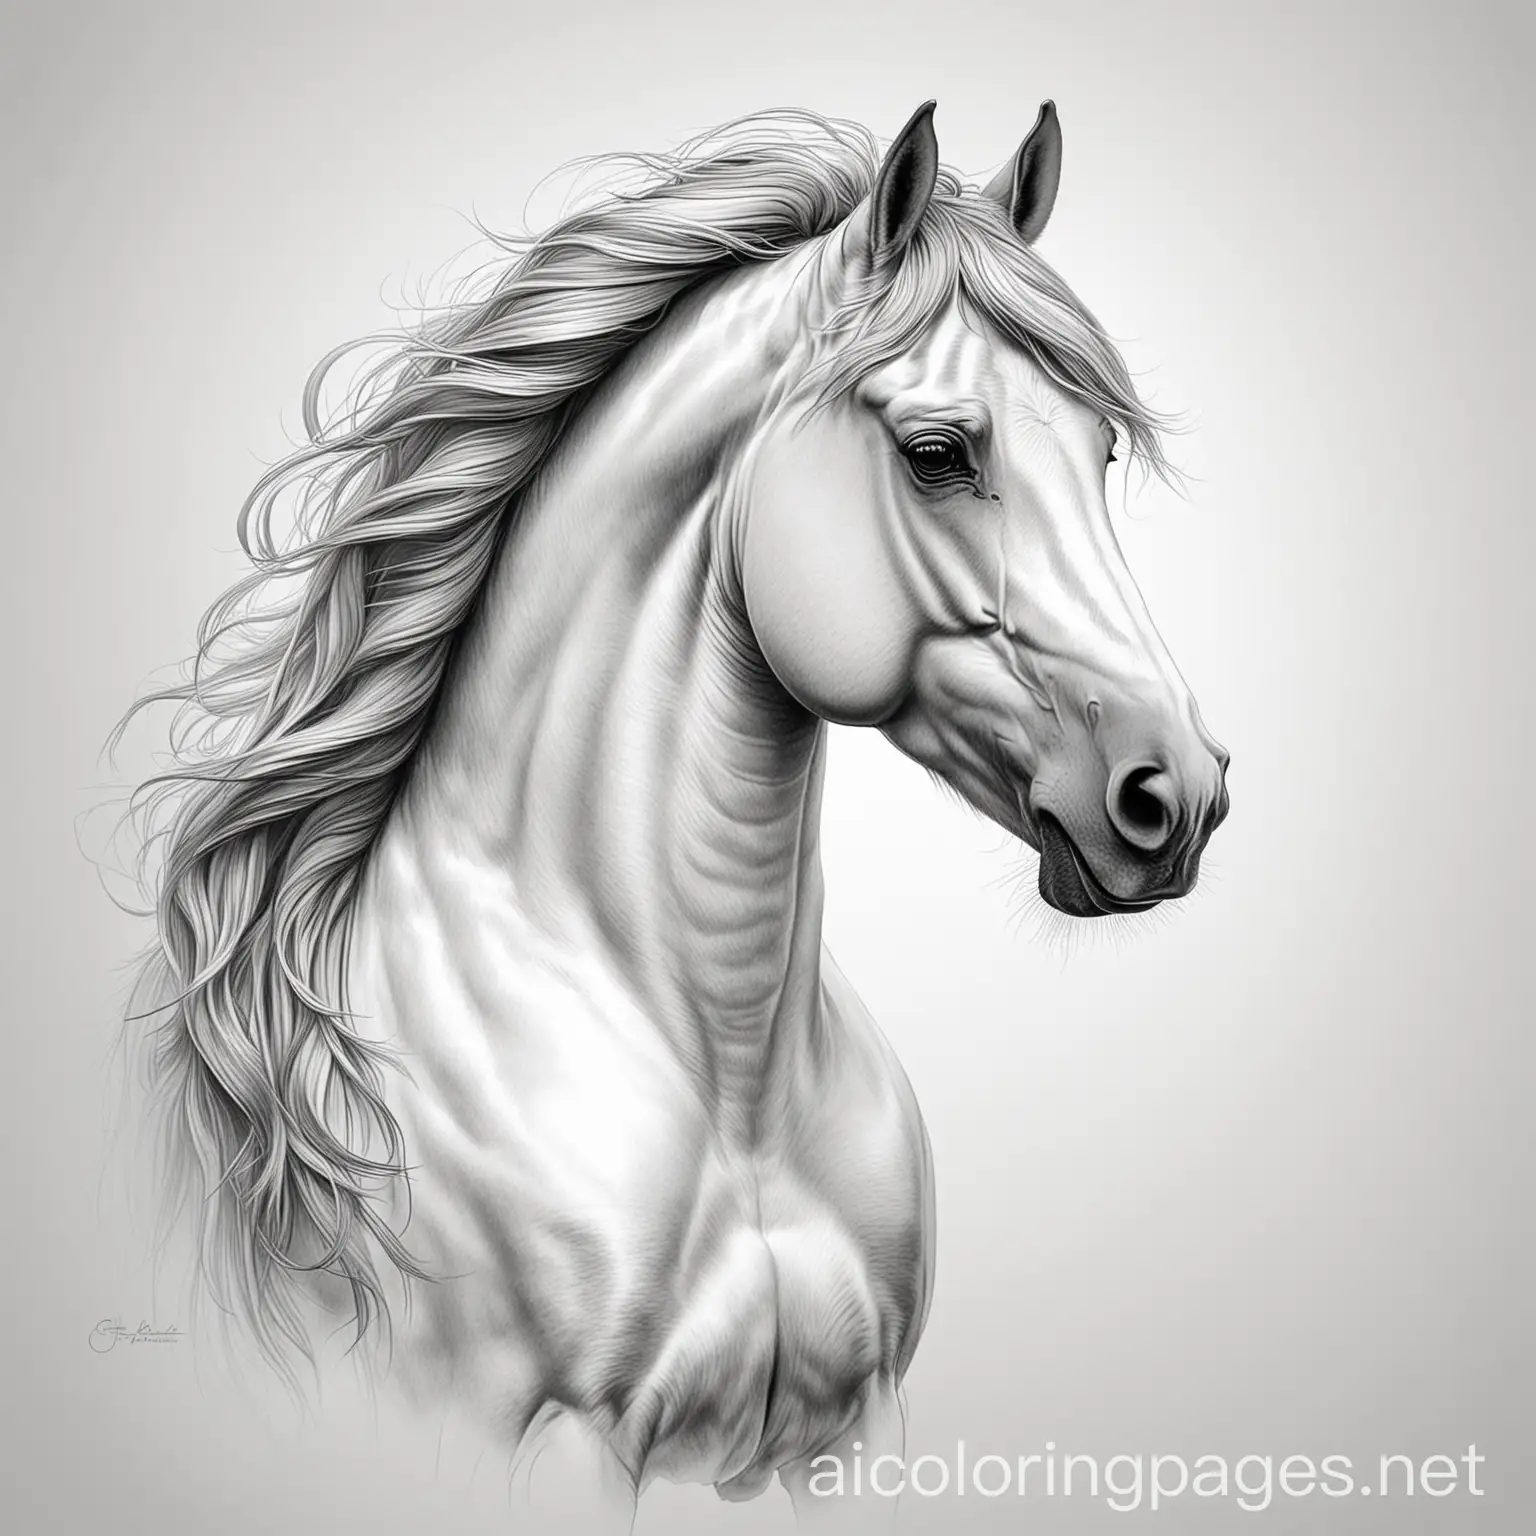 Majestic-Horse-Coloring-Page-Line-Art-on-White-Background